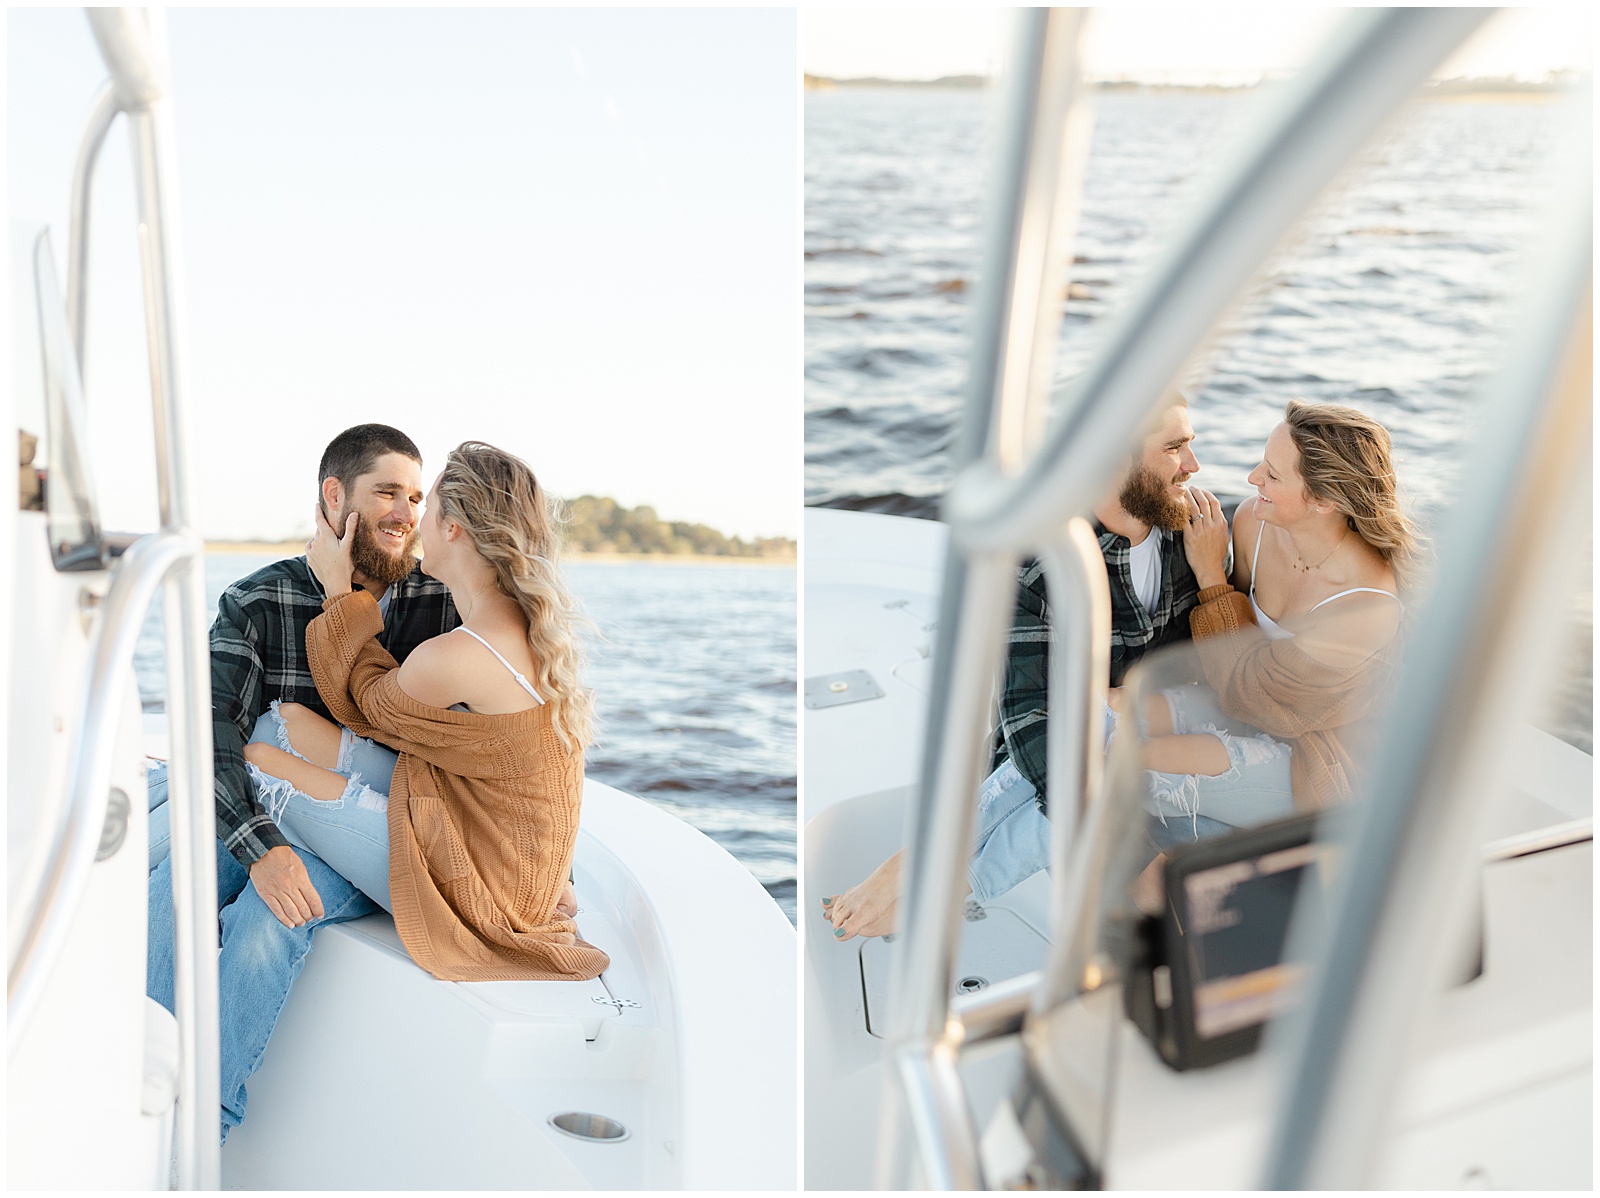 jacksonville florida couples boat anniversary photo session with tabitha baldwin photography_0005.jpg